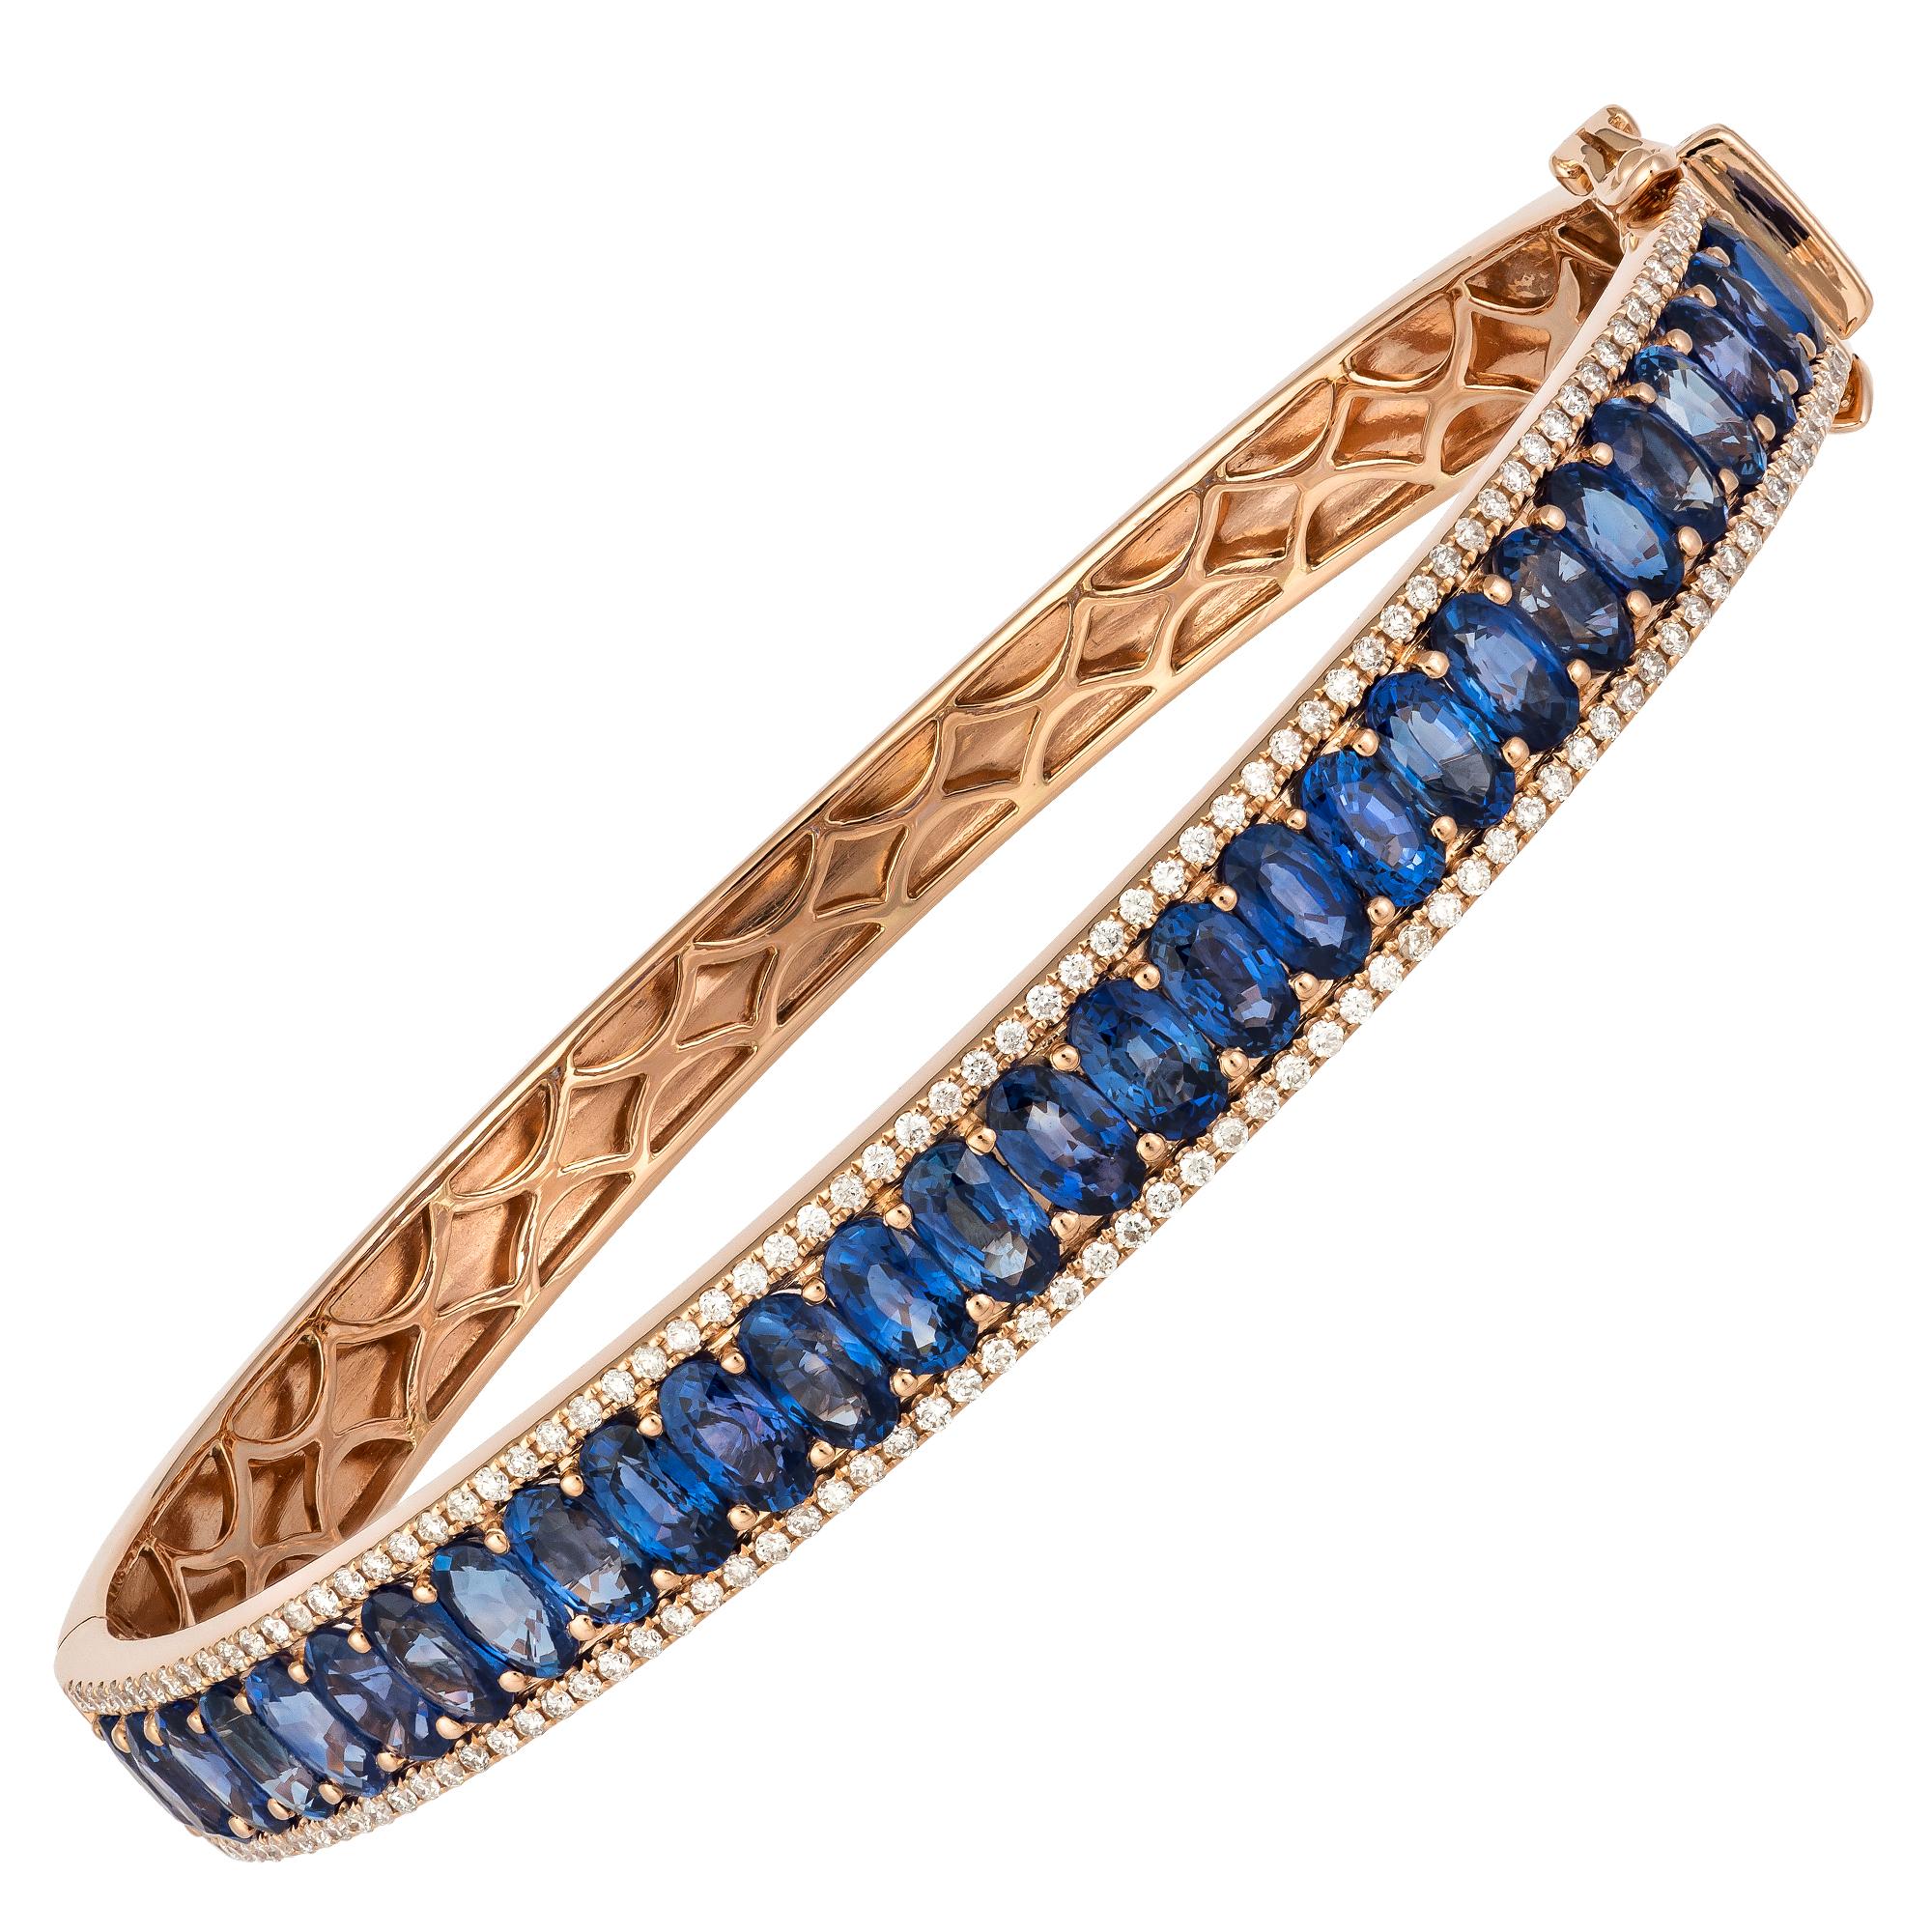 Bangle BRACELET 18K Rose Gold 
Diamond 0.61 Cts/138 Pcs
Blue Sapphire 9.06 Cts/28 Pcs
Weight 20,09 grams


With a heritage of ancient fine Swiss jewelry traditions, NATKINA is a Geneva based jewellery brand, which creates modern jewellery